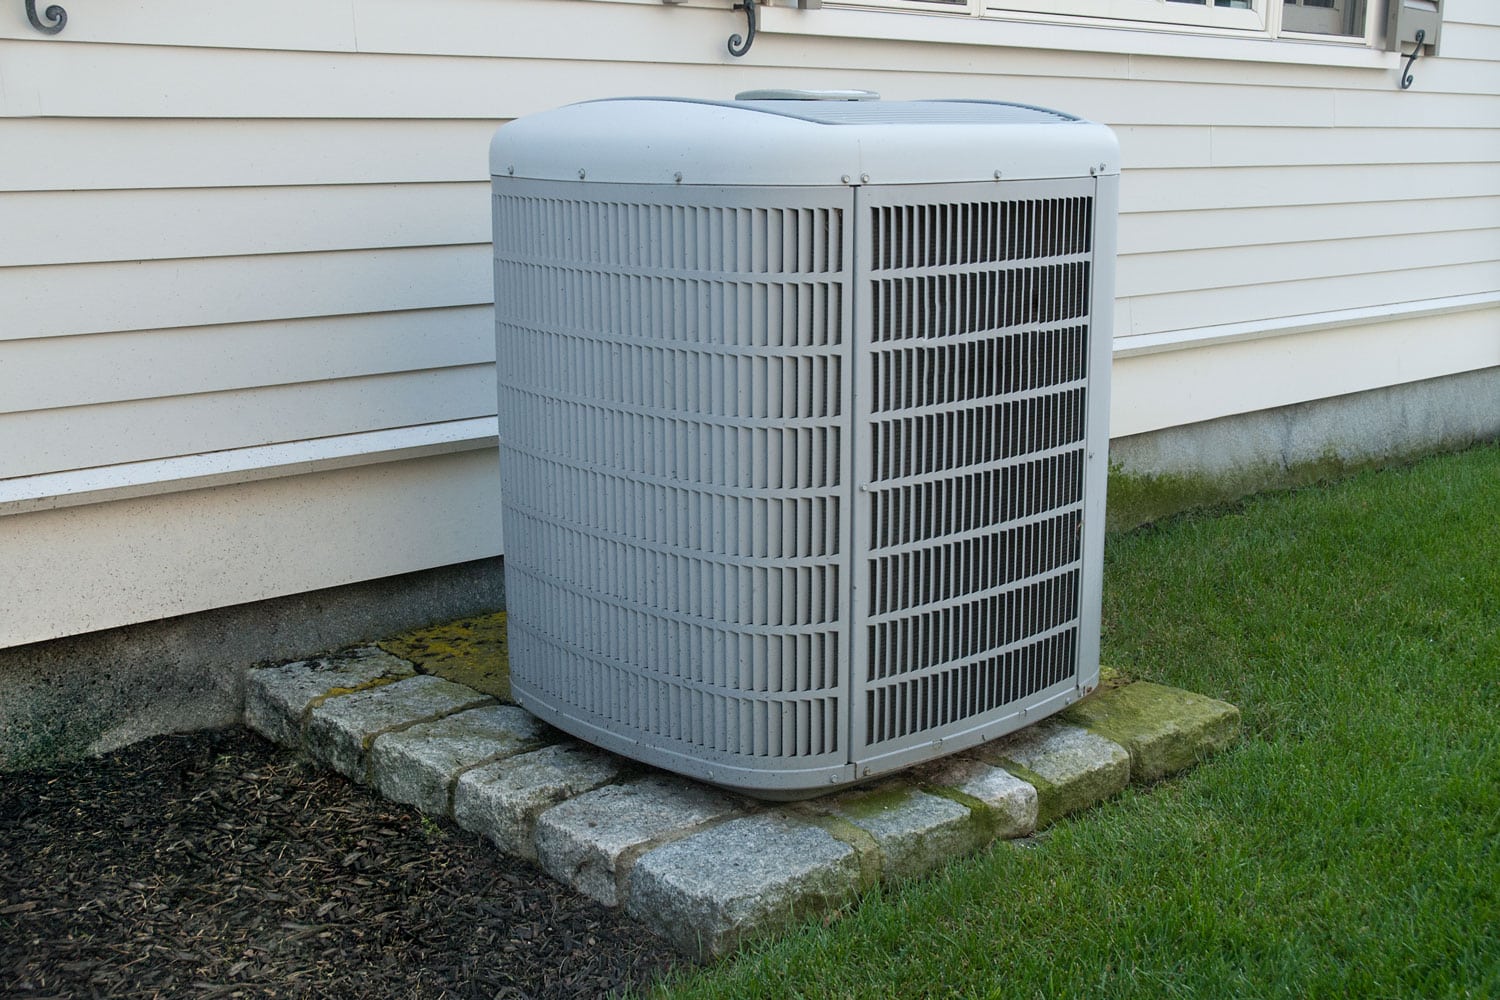 An air conditioning unit mounted on a concrete pad